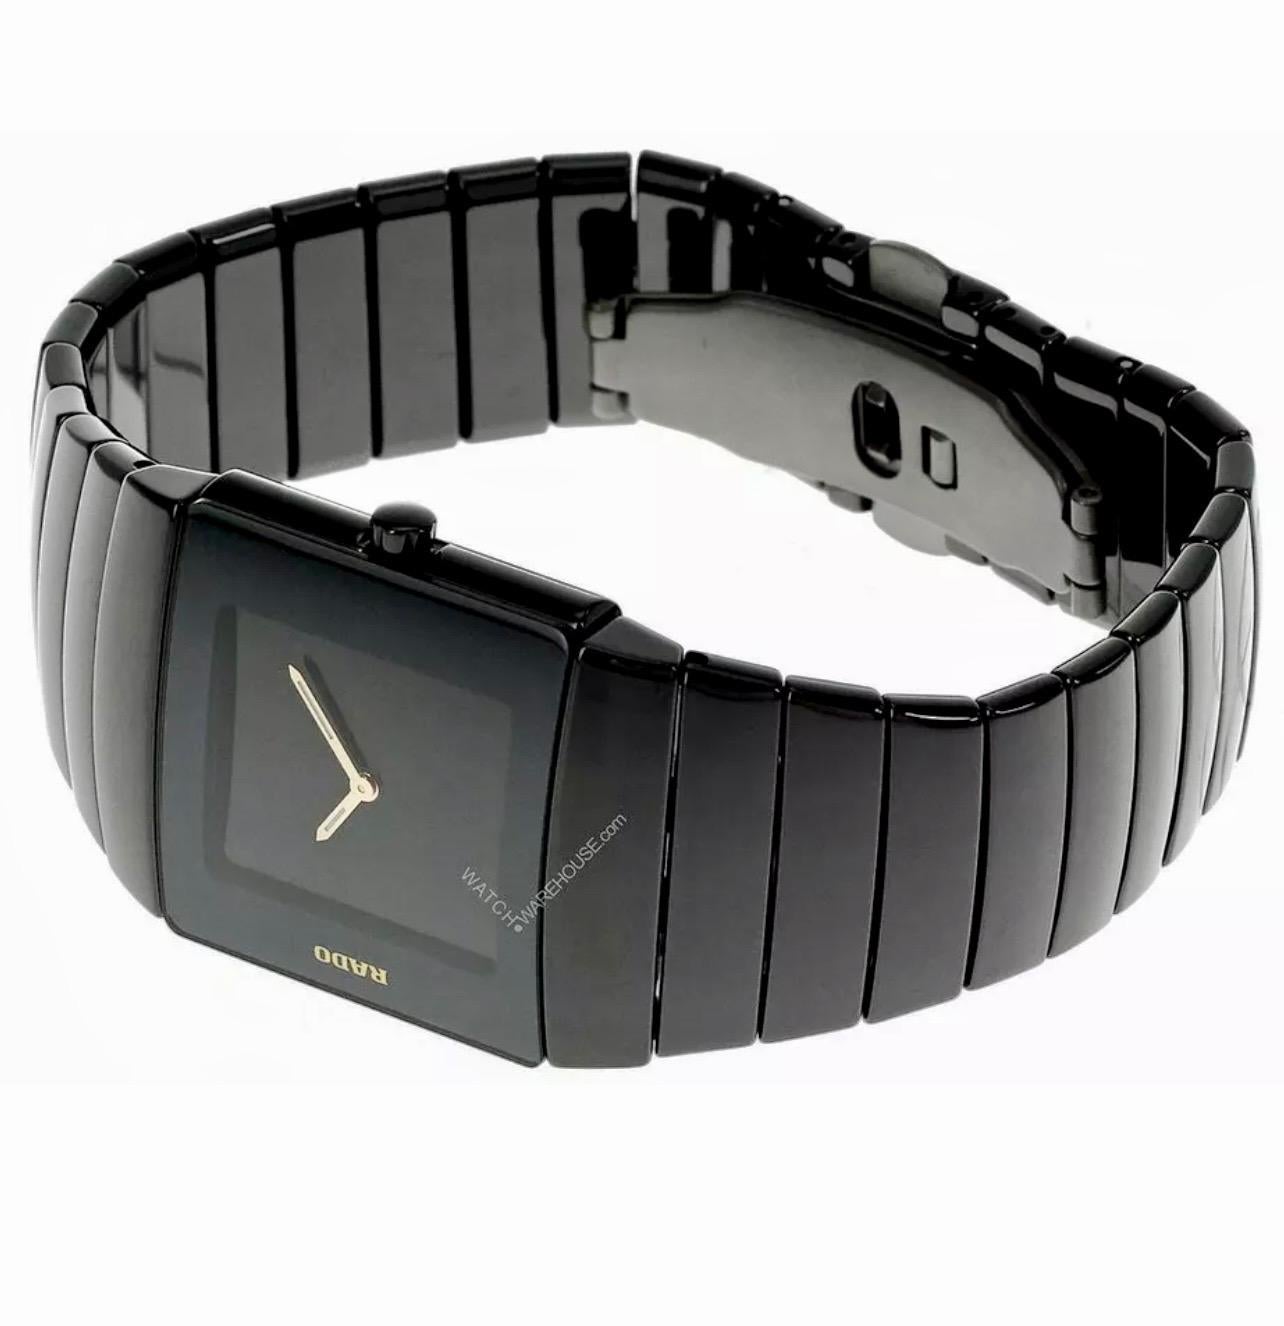 RADO Sintra Jubile Analog/Digital Black Dial Men's Watch In Excellent Condition For Sale In New York, NY